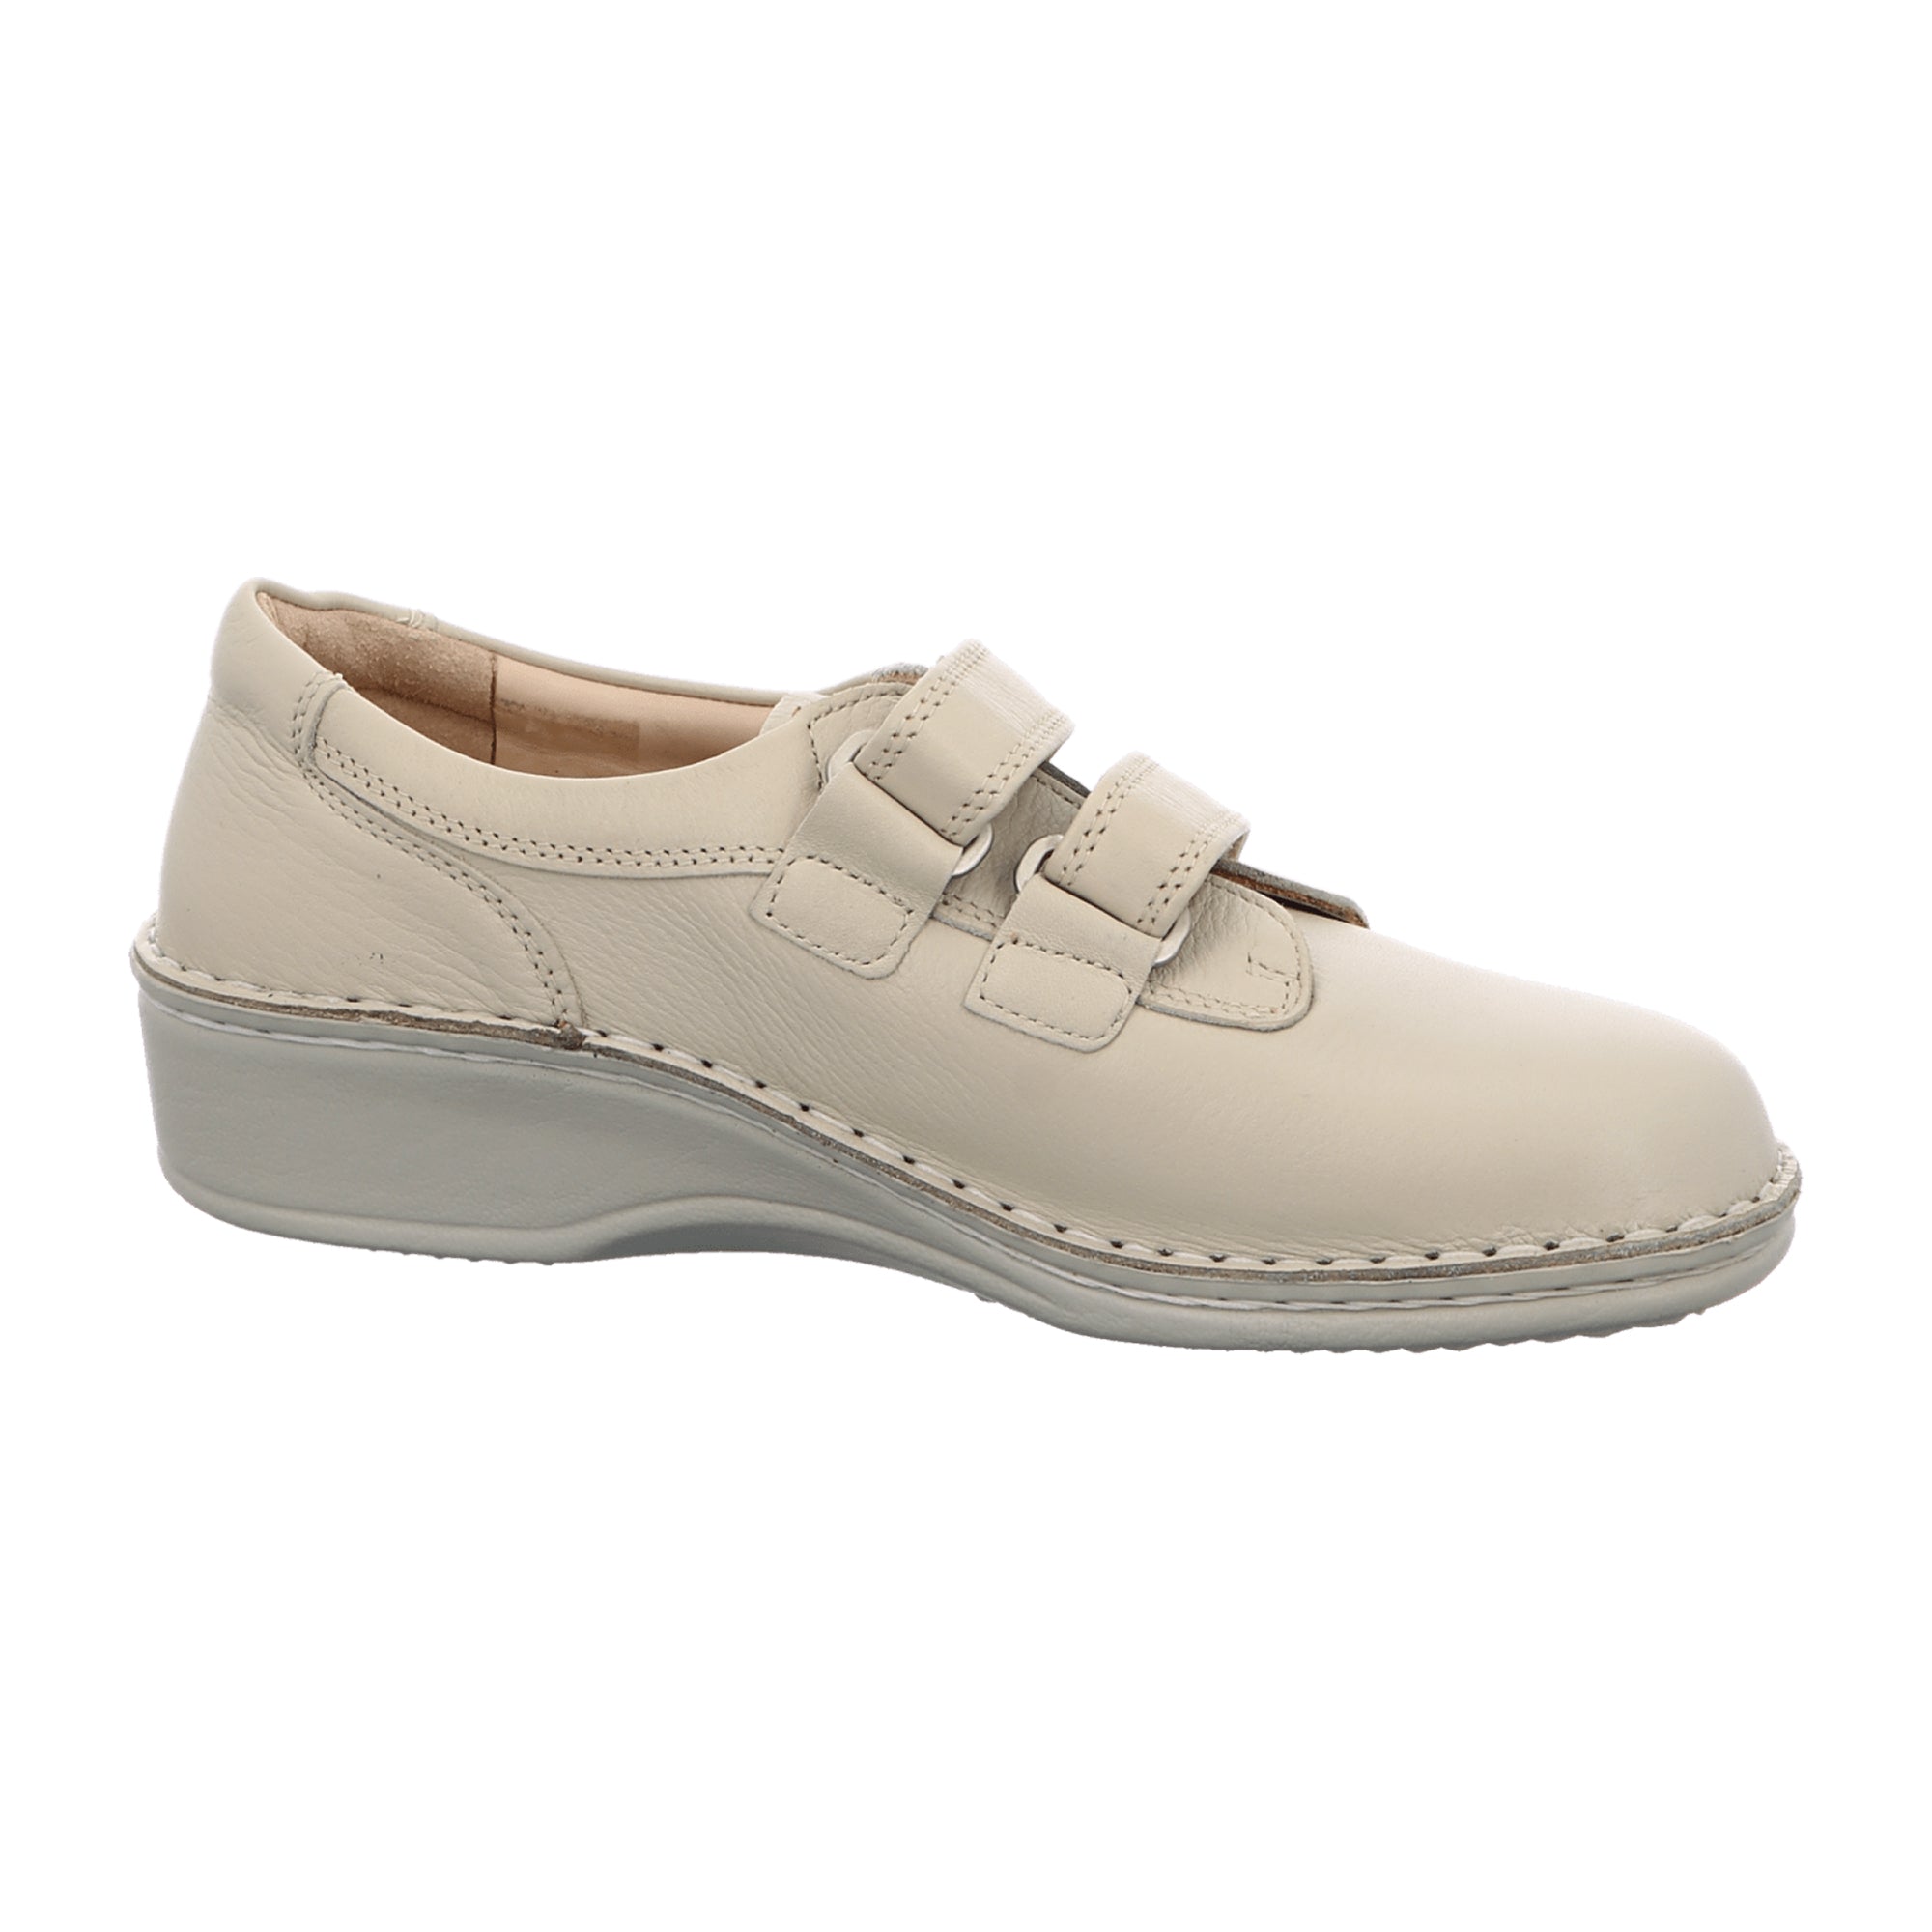 Finn Comfort Women's Therapeutic Shoes in Beige - Stylish & Durable